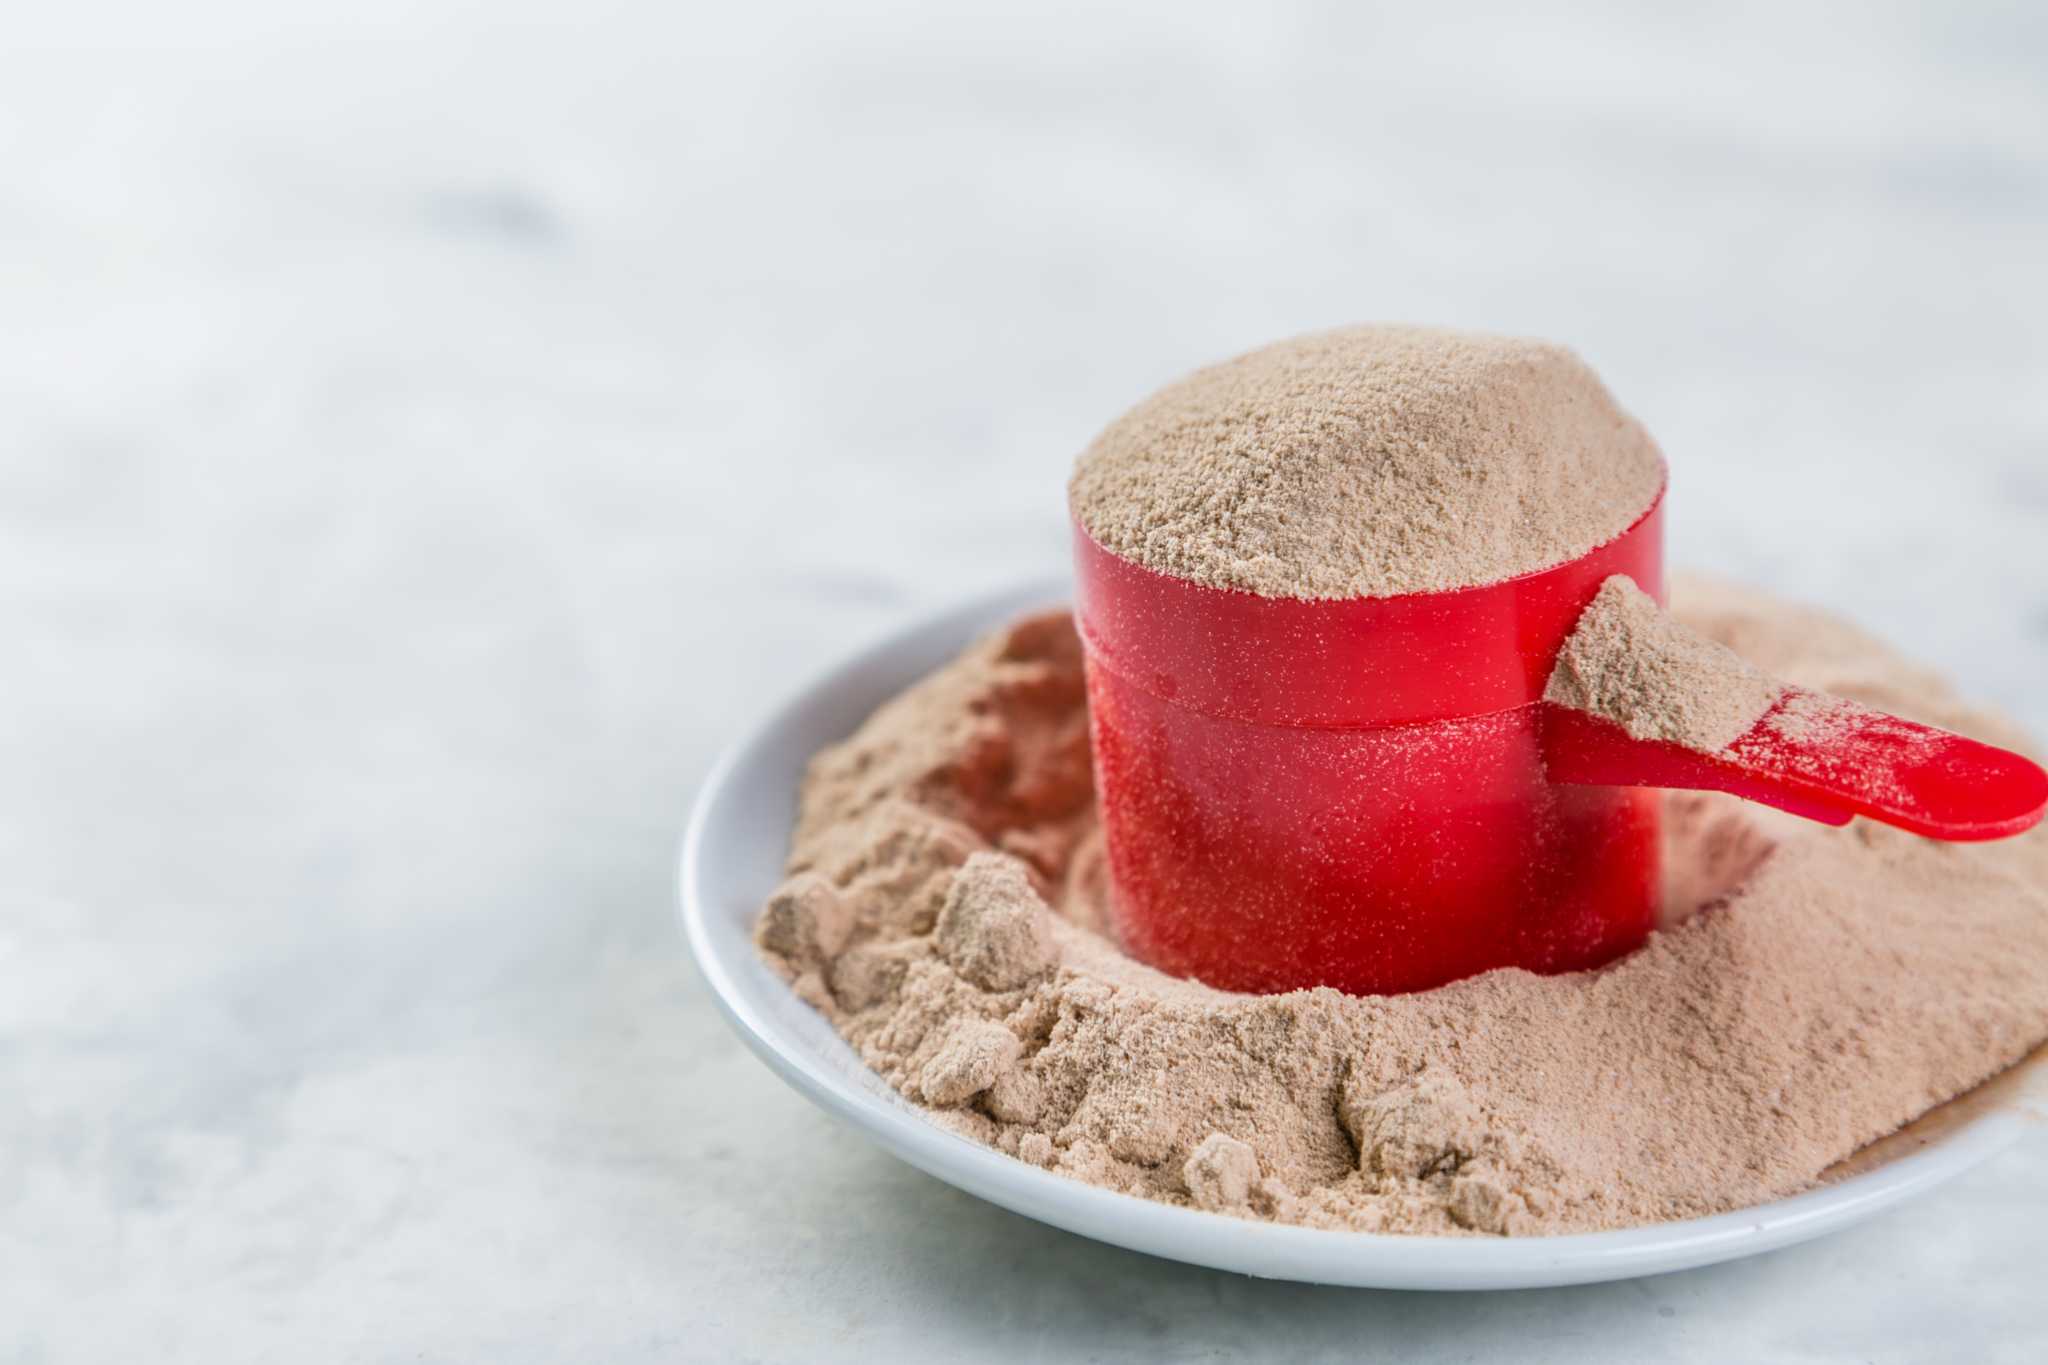 What Is a Scoop of Protein Powder Equivalent To?